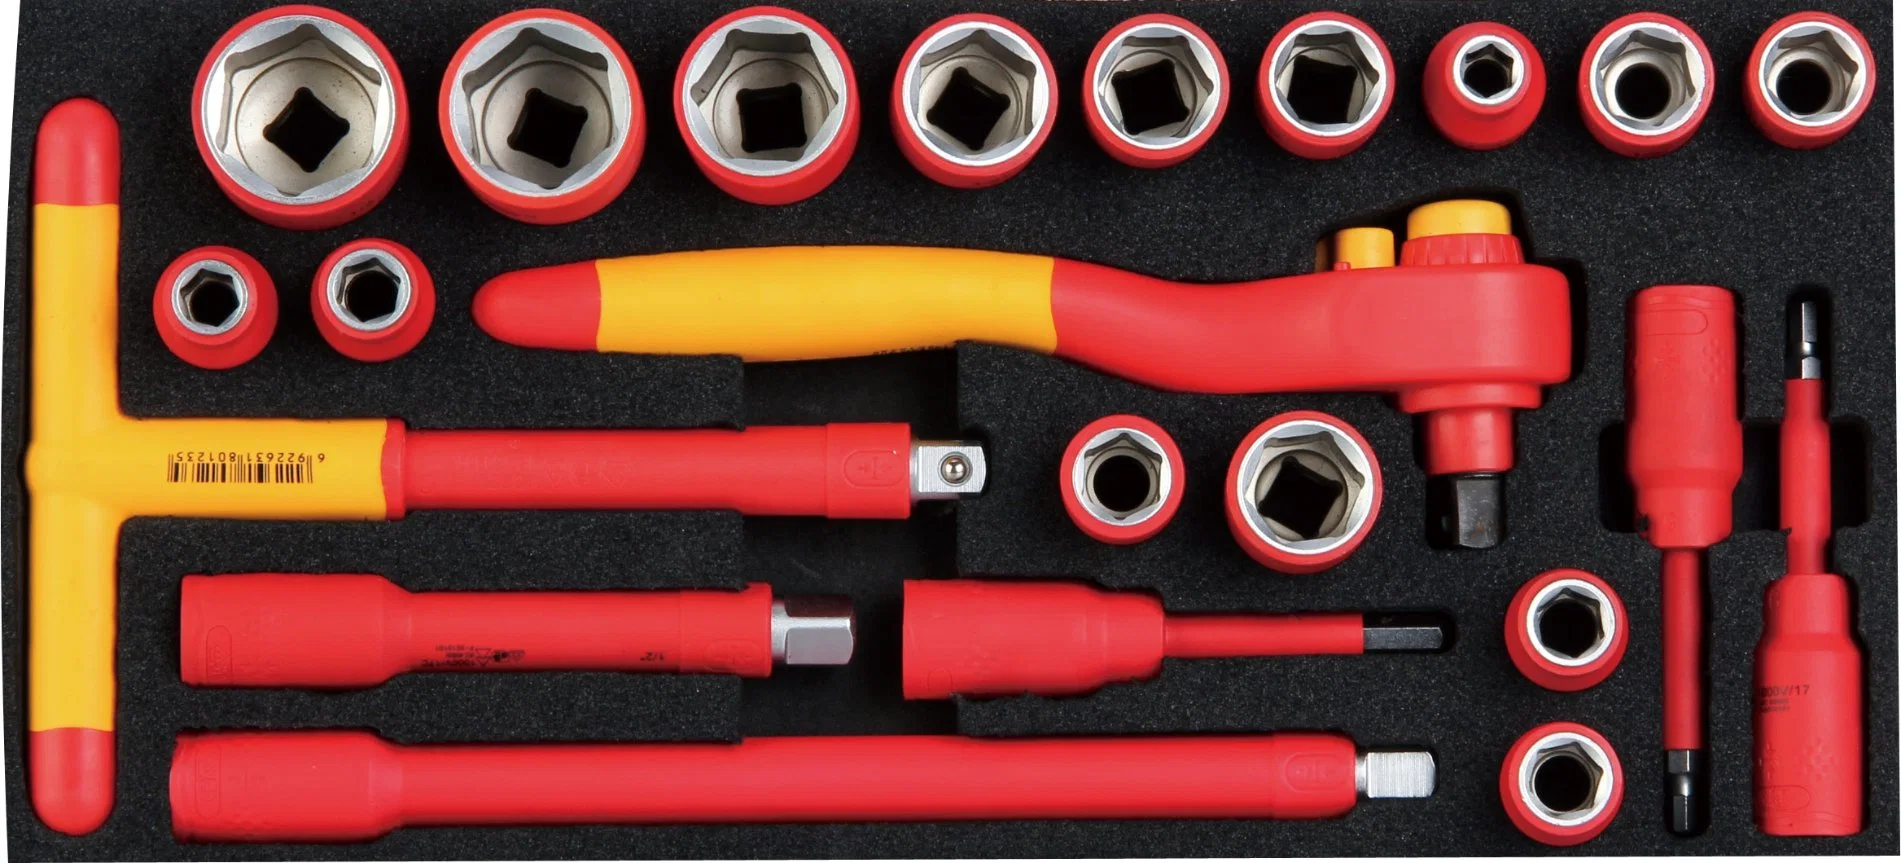 Great Wall Brand Portable 22-PC Dr. 12.5mm Insulated Socket Tool Kit